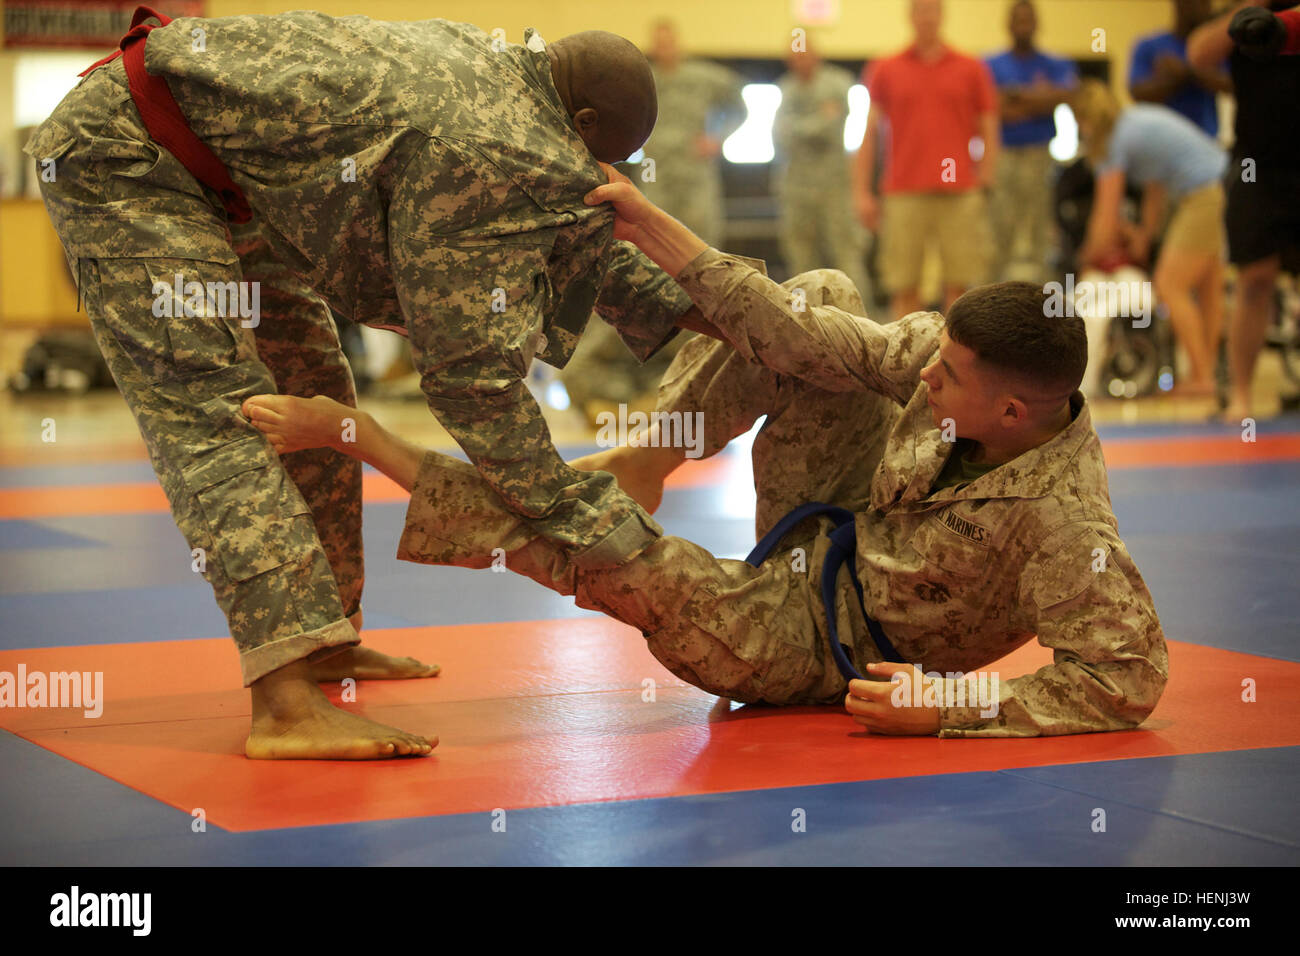 A U.S. Army Soldier and U.S. Marine fight head to head during an Army Combatives Tournament at Fort Dix, N.J., June 7, 2014. This tournament includes Soldiers, Airmen and Marines competing in different weight classes for a chance to win the title. (U.S. Army photo by Sgt. Austin Berner/Released) 98th Division Army Combatives Tournament 140607-A-BZ540-201 Stock Photo